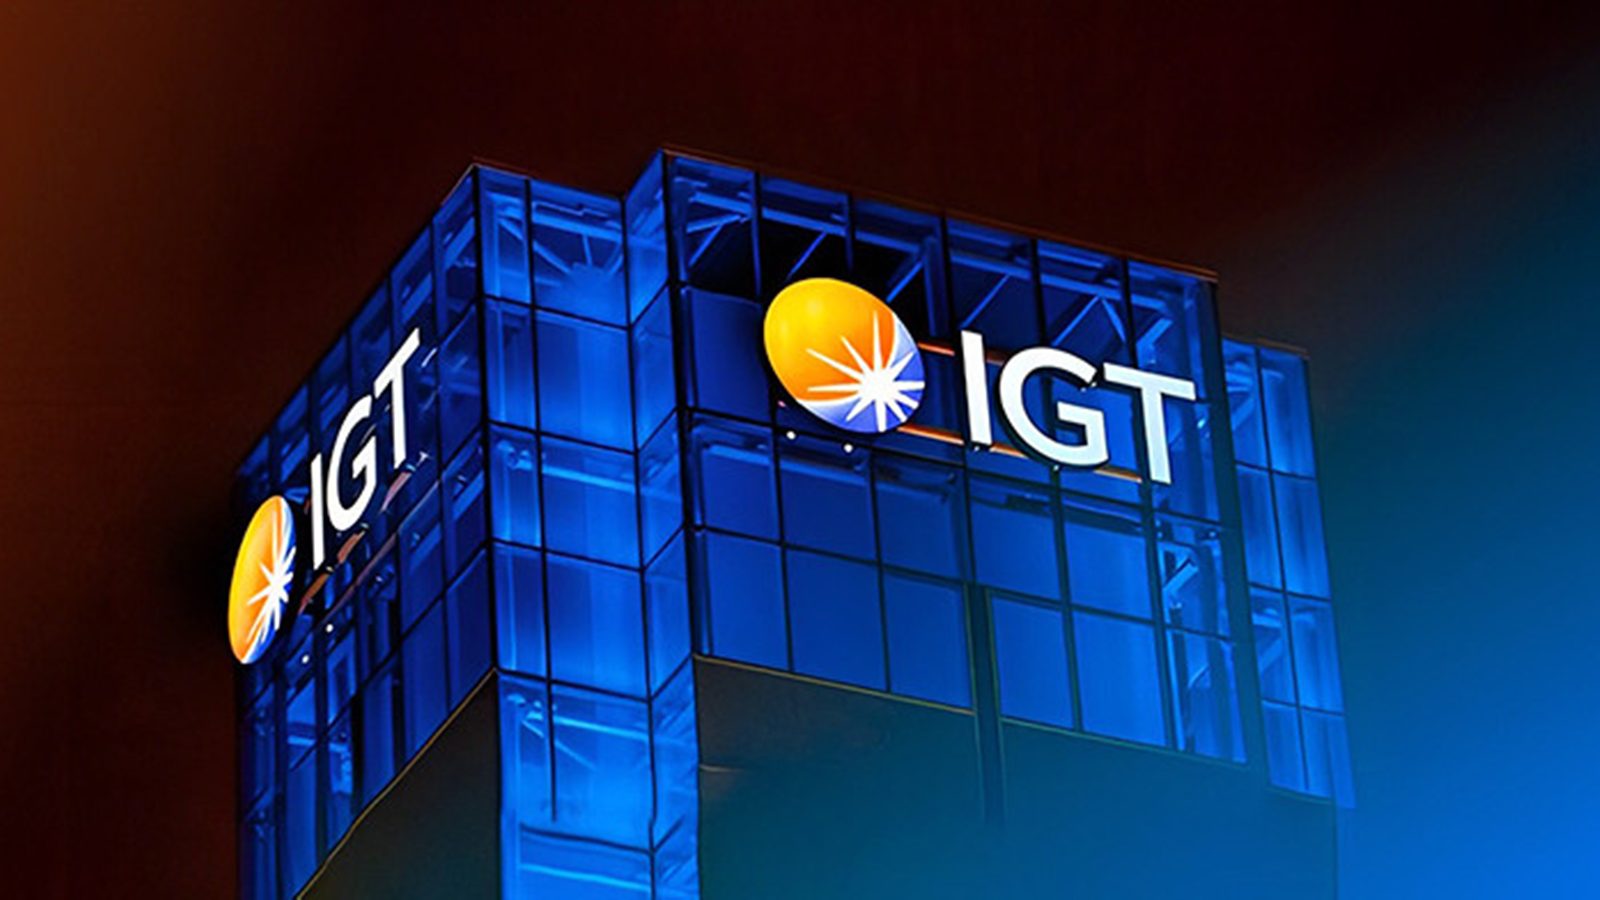 IGT Transforms UK Lottery